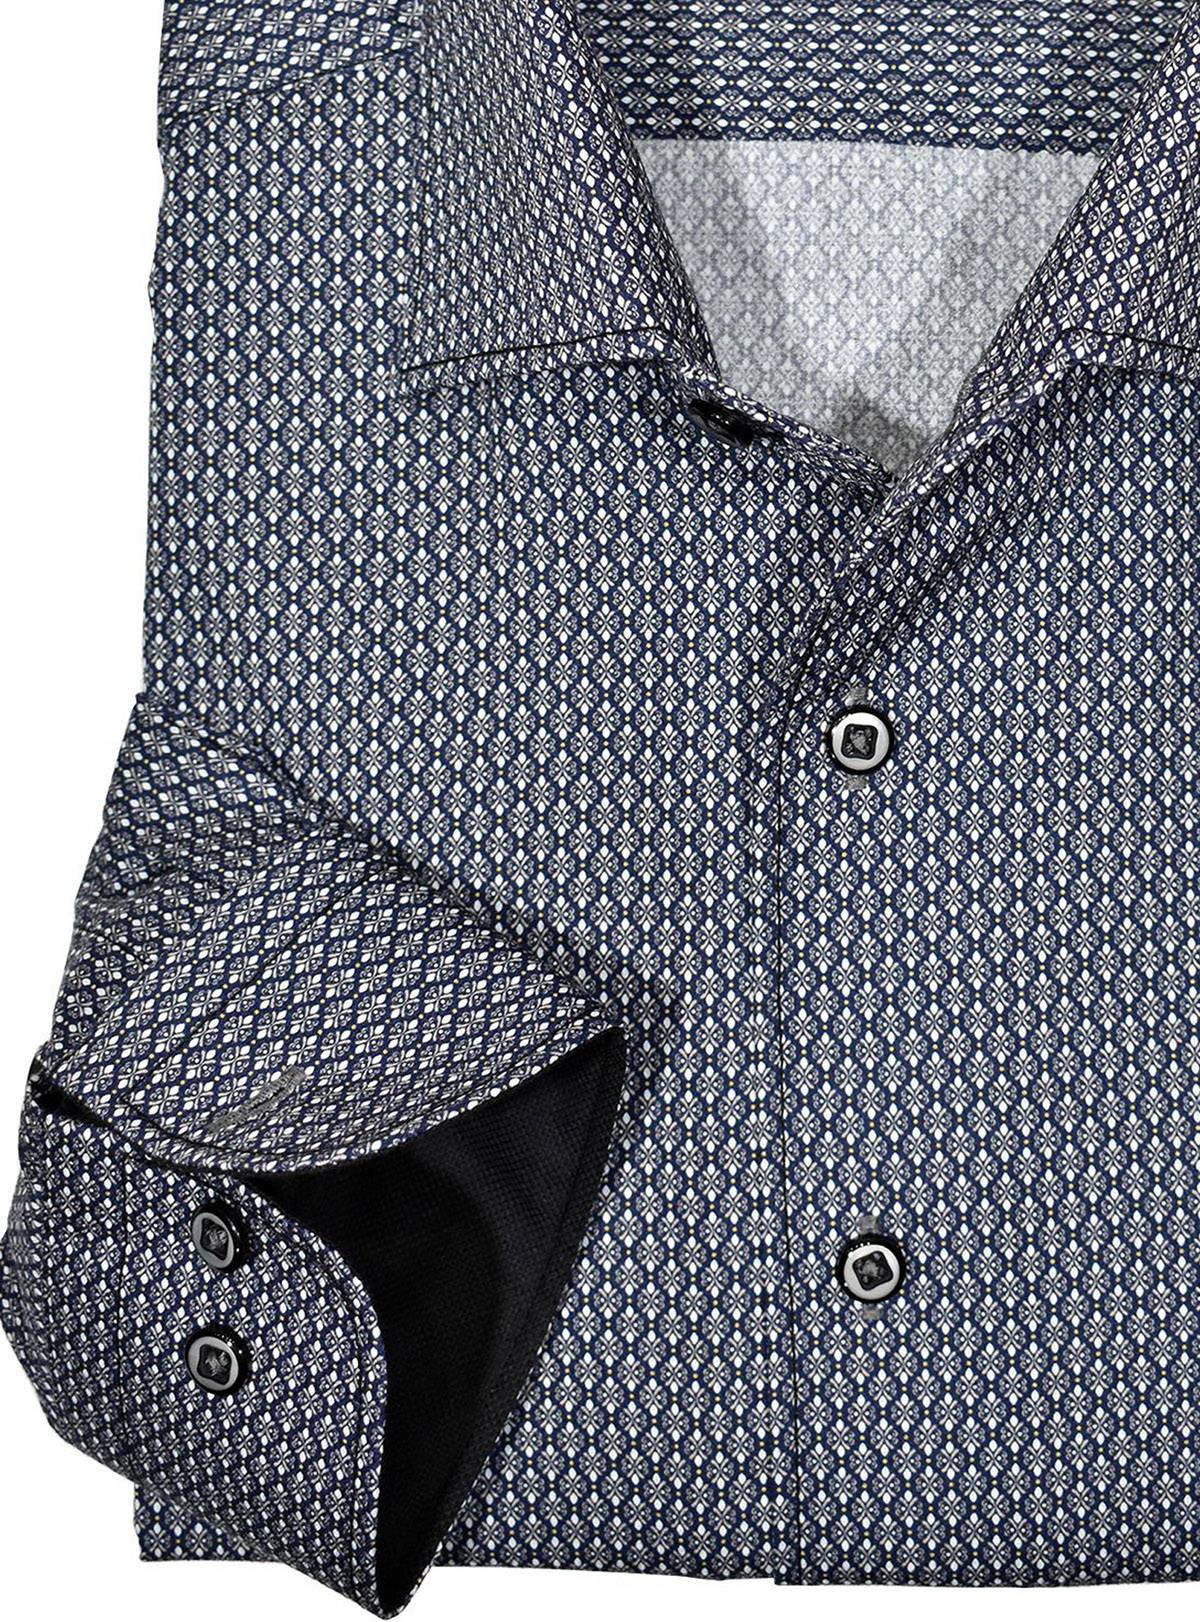 Marcello exclusive 1 piece roll collar shirt is the ultimate in style and sophistication.  The one piece collar stands perfectly and looks great alone or under a sport coat.  You will surely want every one piece roll collar shirt we offer.  Rich cotton / microfiber fabric. Fashion tall oval medallion pattern in striking grey/black colors. Adjustable 2 button cuffs. Unique extra sleeve button to roll cuffs without flaring. Classic shaped fit.